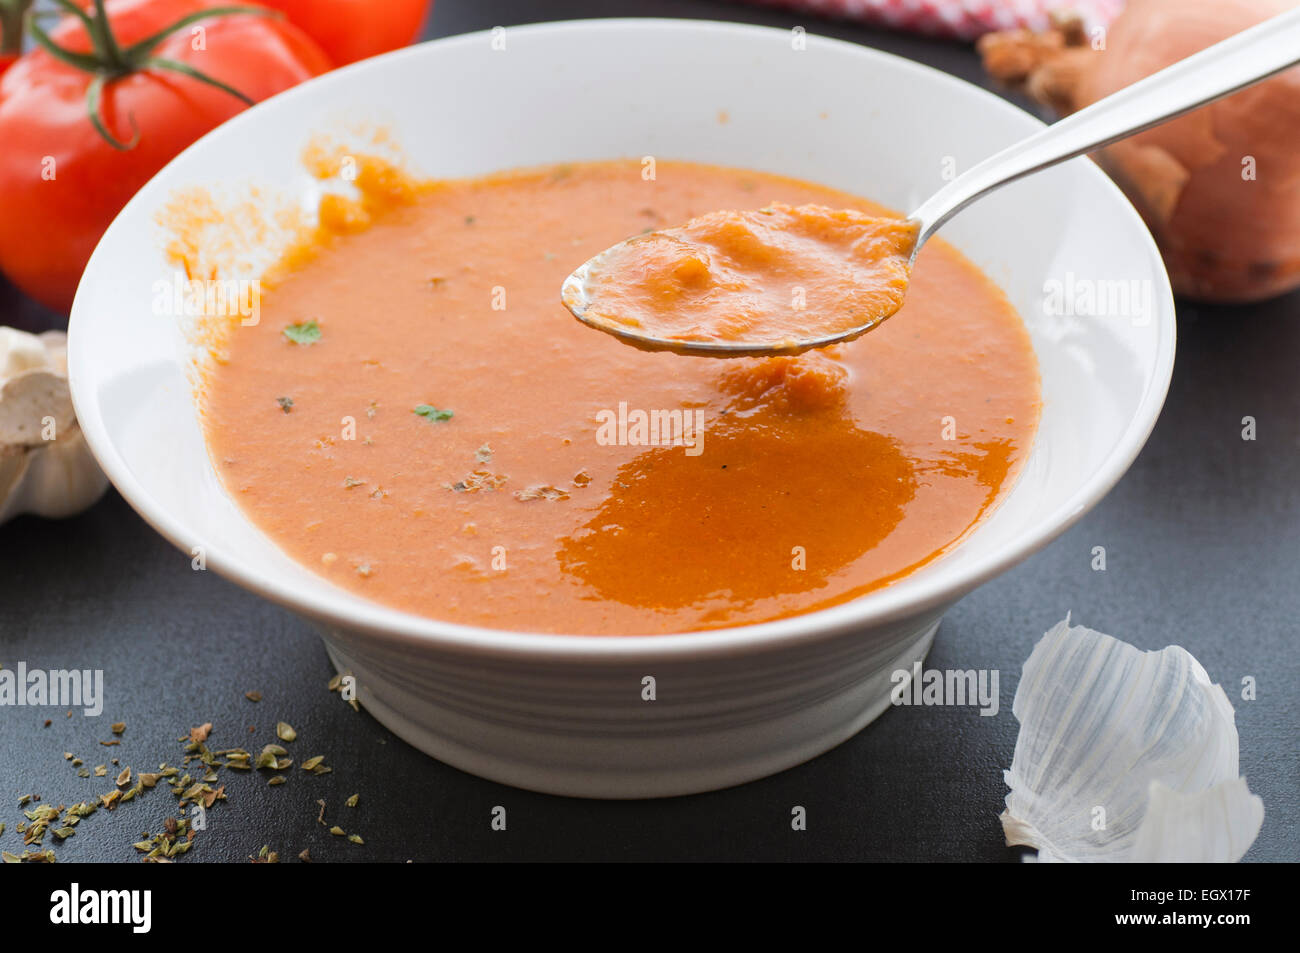 Homemade tomato soup freshly made from roasted tomatoes, onion, garlic and broth. Stock Photo